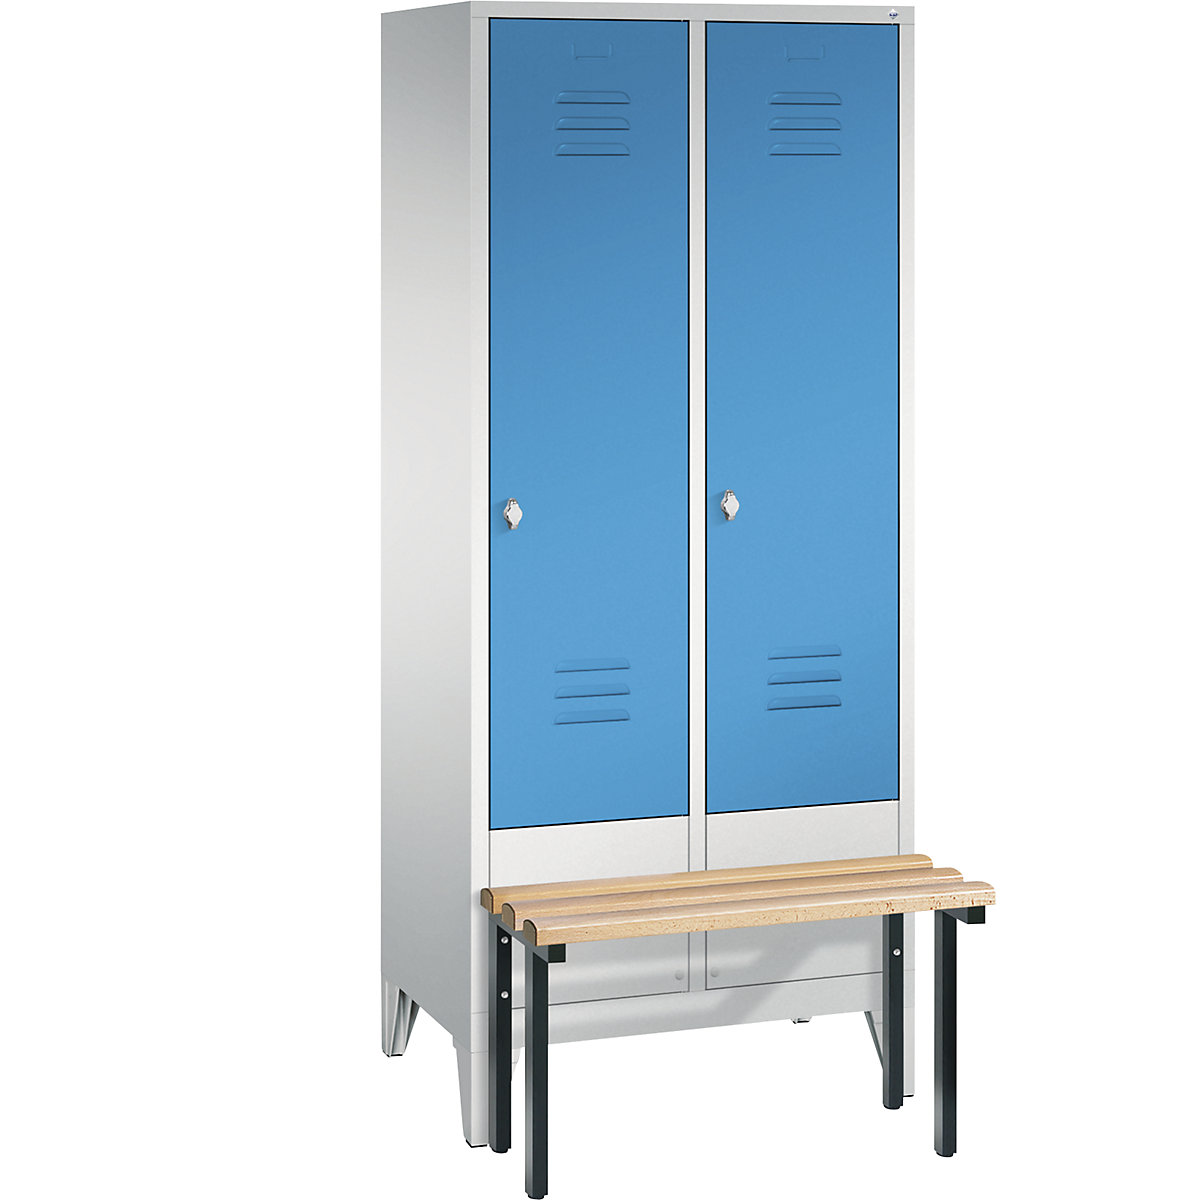 CLASSIC cloakroom locker with bench mounted in front – C+P